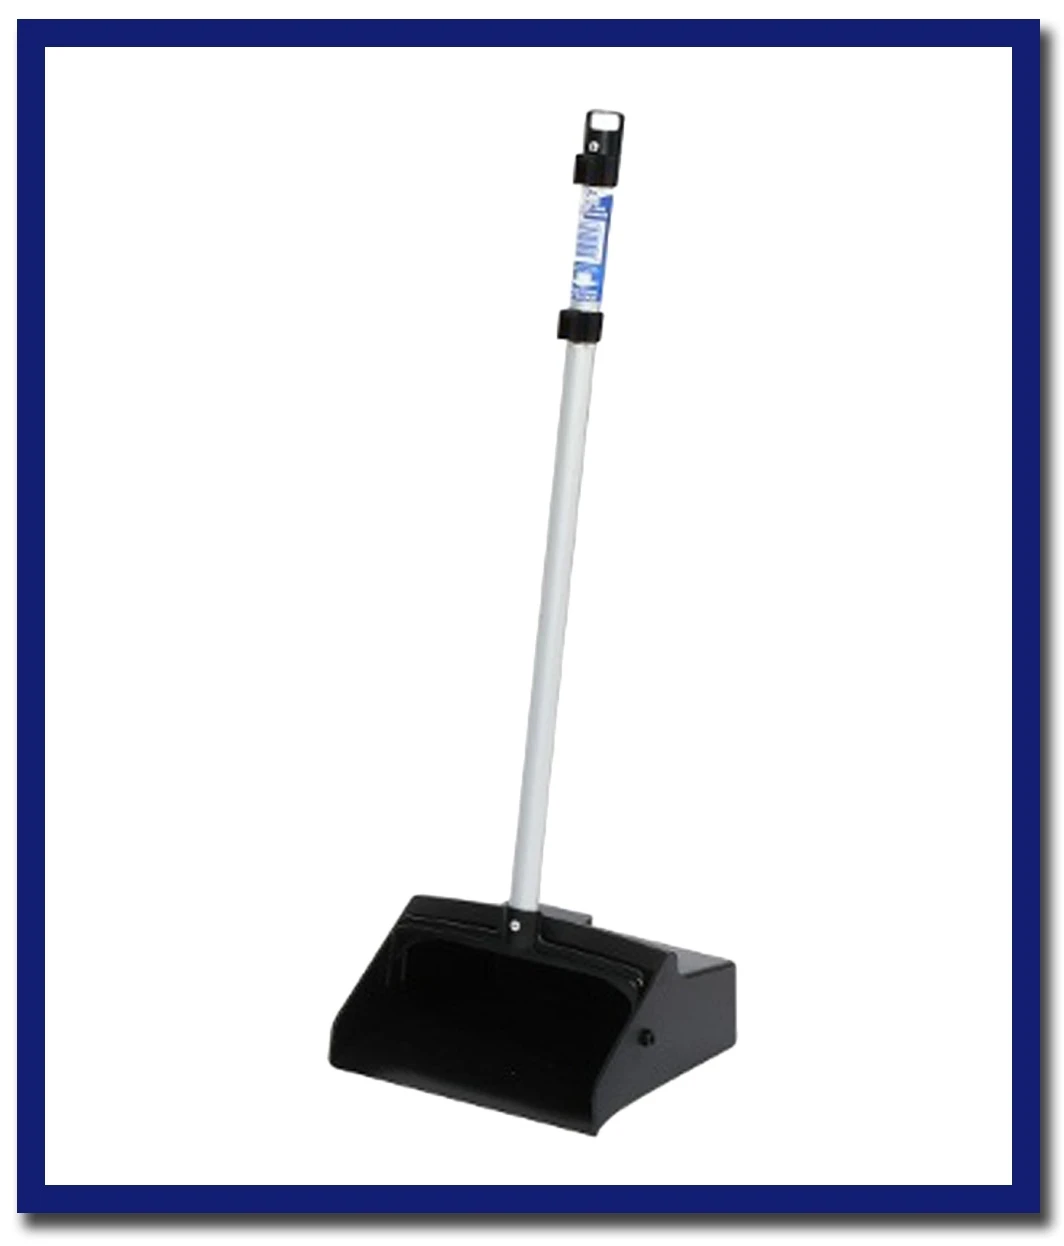 Edco Deluxe Lobby Pan - 1 Unit - Stone Doctor Australia - Cleaning Accessories > Sweeping > Deluxe Lobby Pan